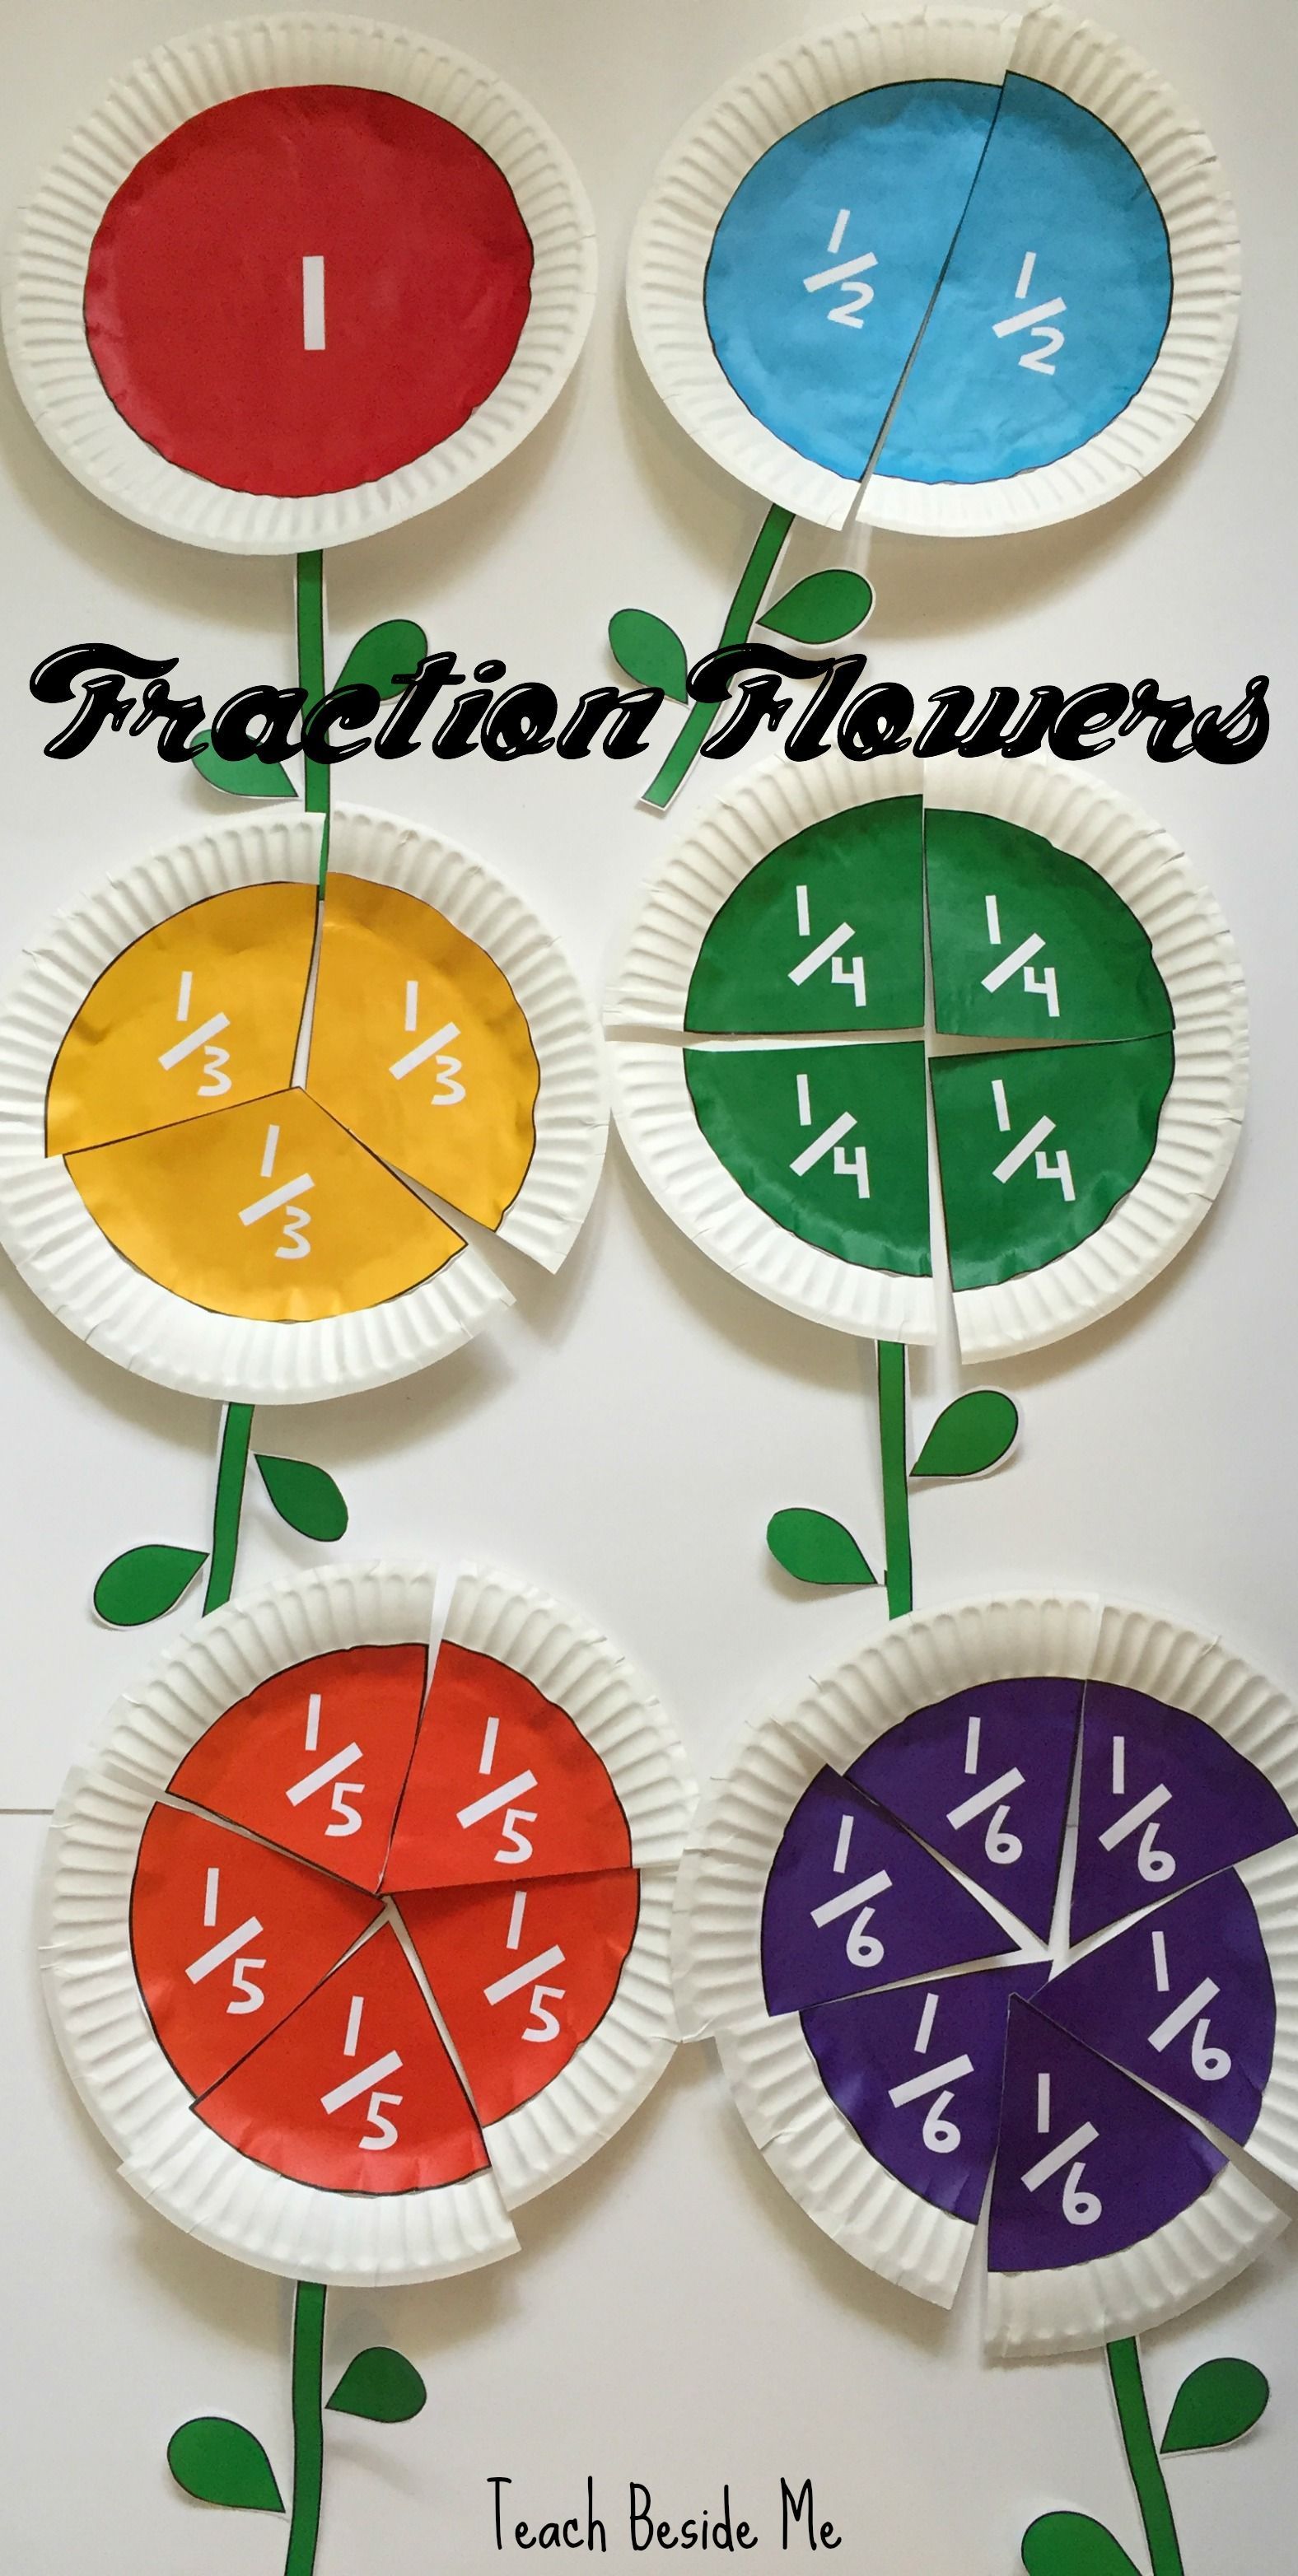 Learn fractions in a creative way by making these fraction flowers out of paper plates- includes a set